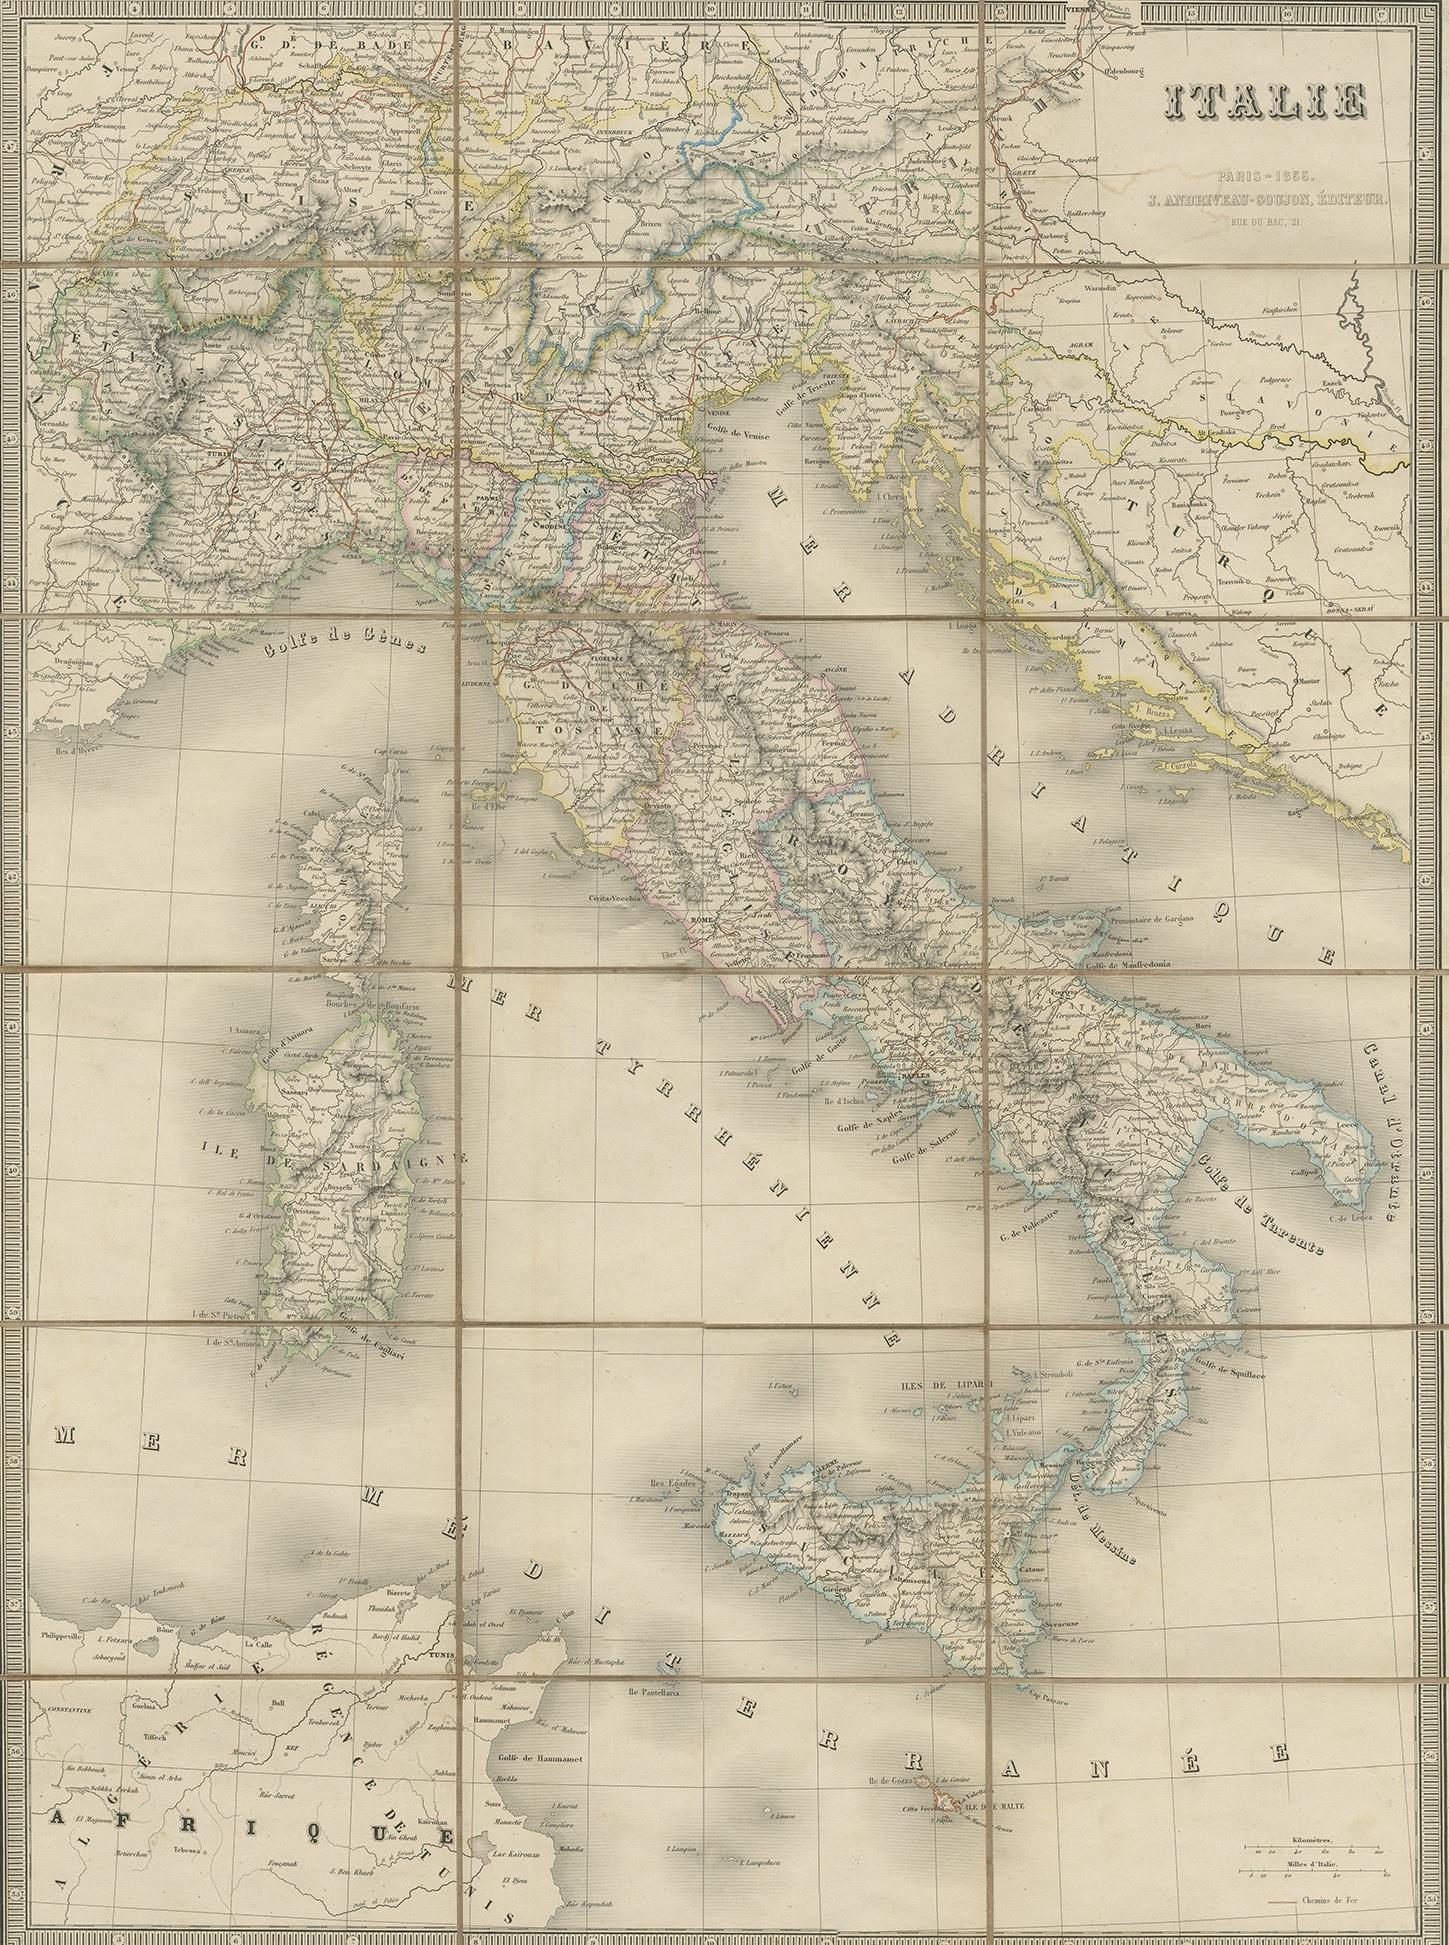 Antique folding map of Italy titled 'Italie'. Detailed map of Italy. The map originates from 'Atlas Universel' and is mounted on linen.